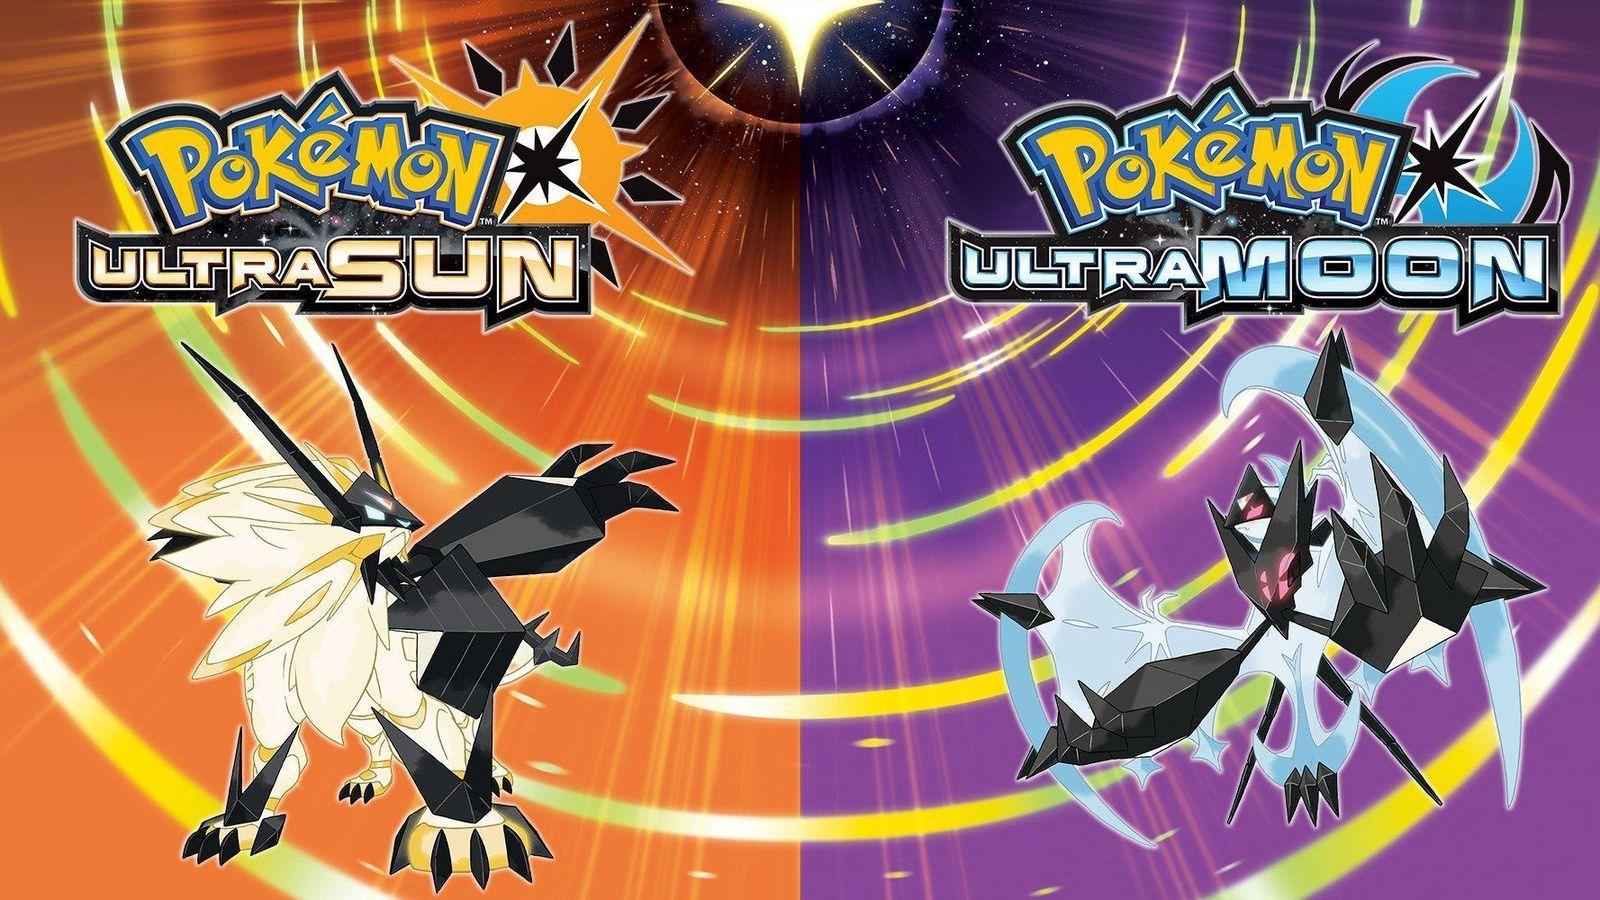 Pokemon Ultra Sun and Ultra Moon Comes with Classic Pokemon